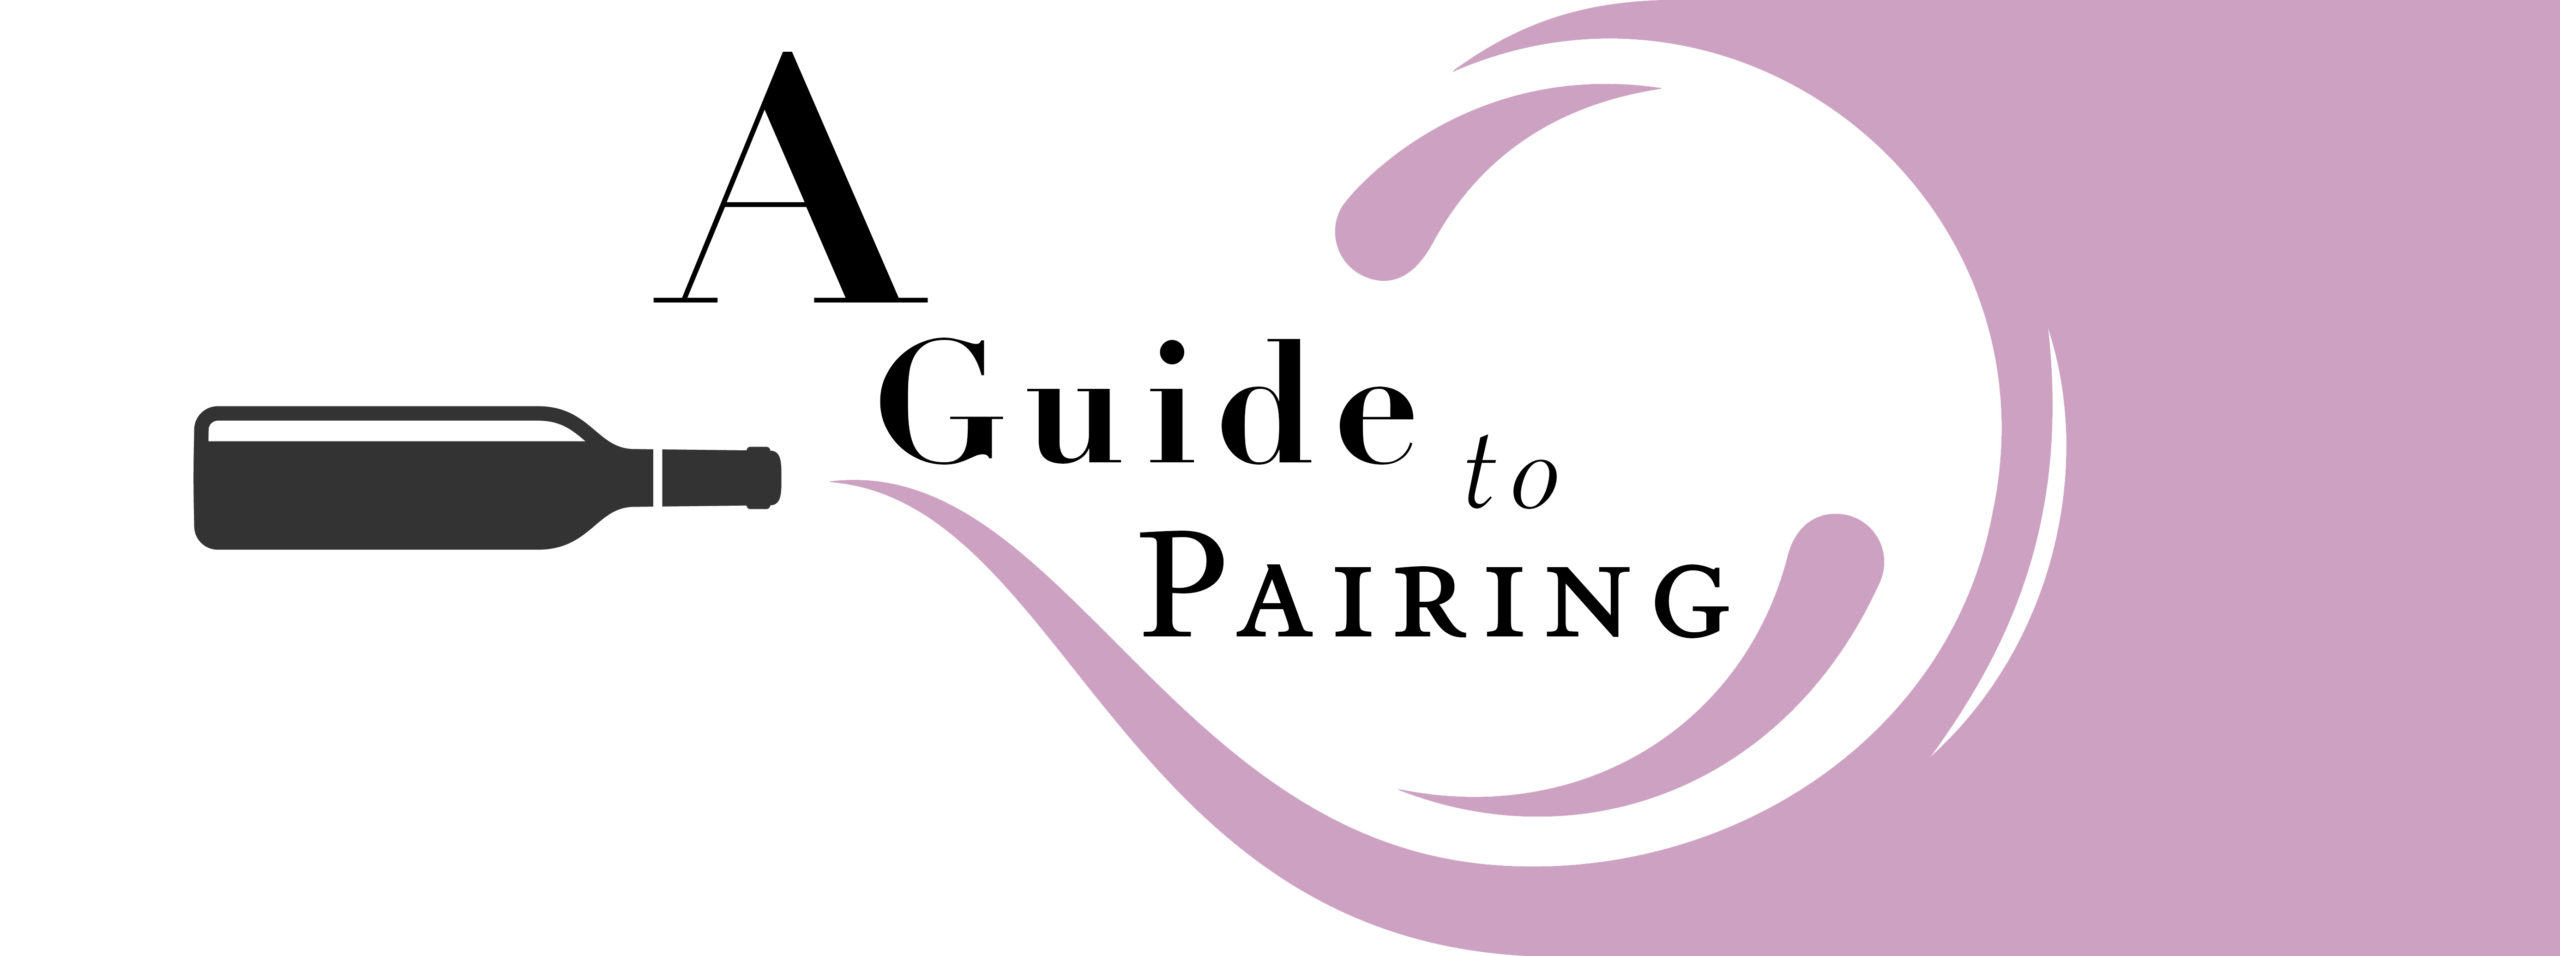 A Guide to Pairing graphic in pink with a wine bottle